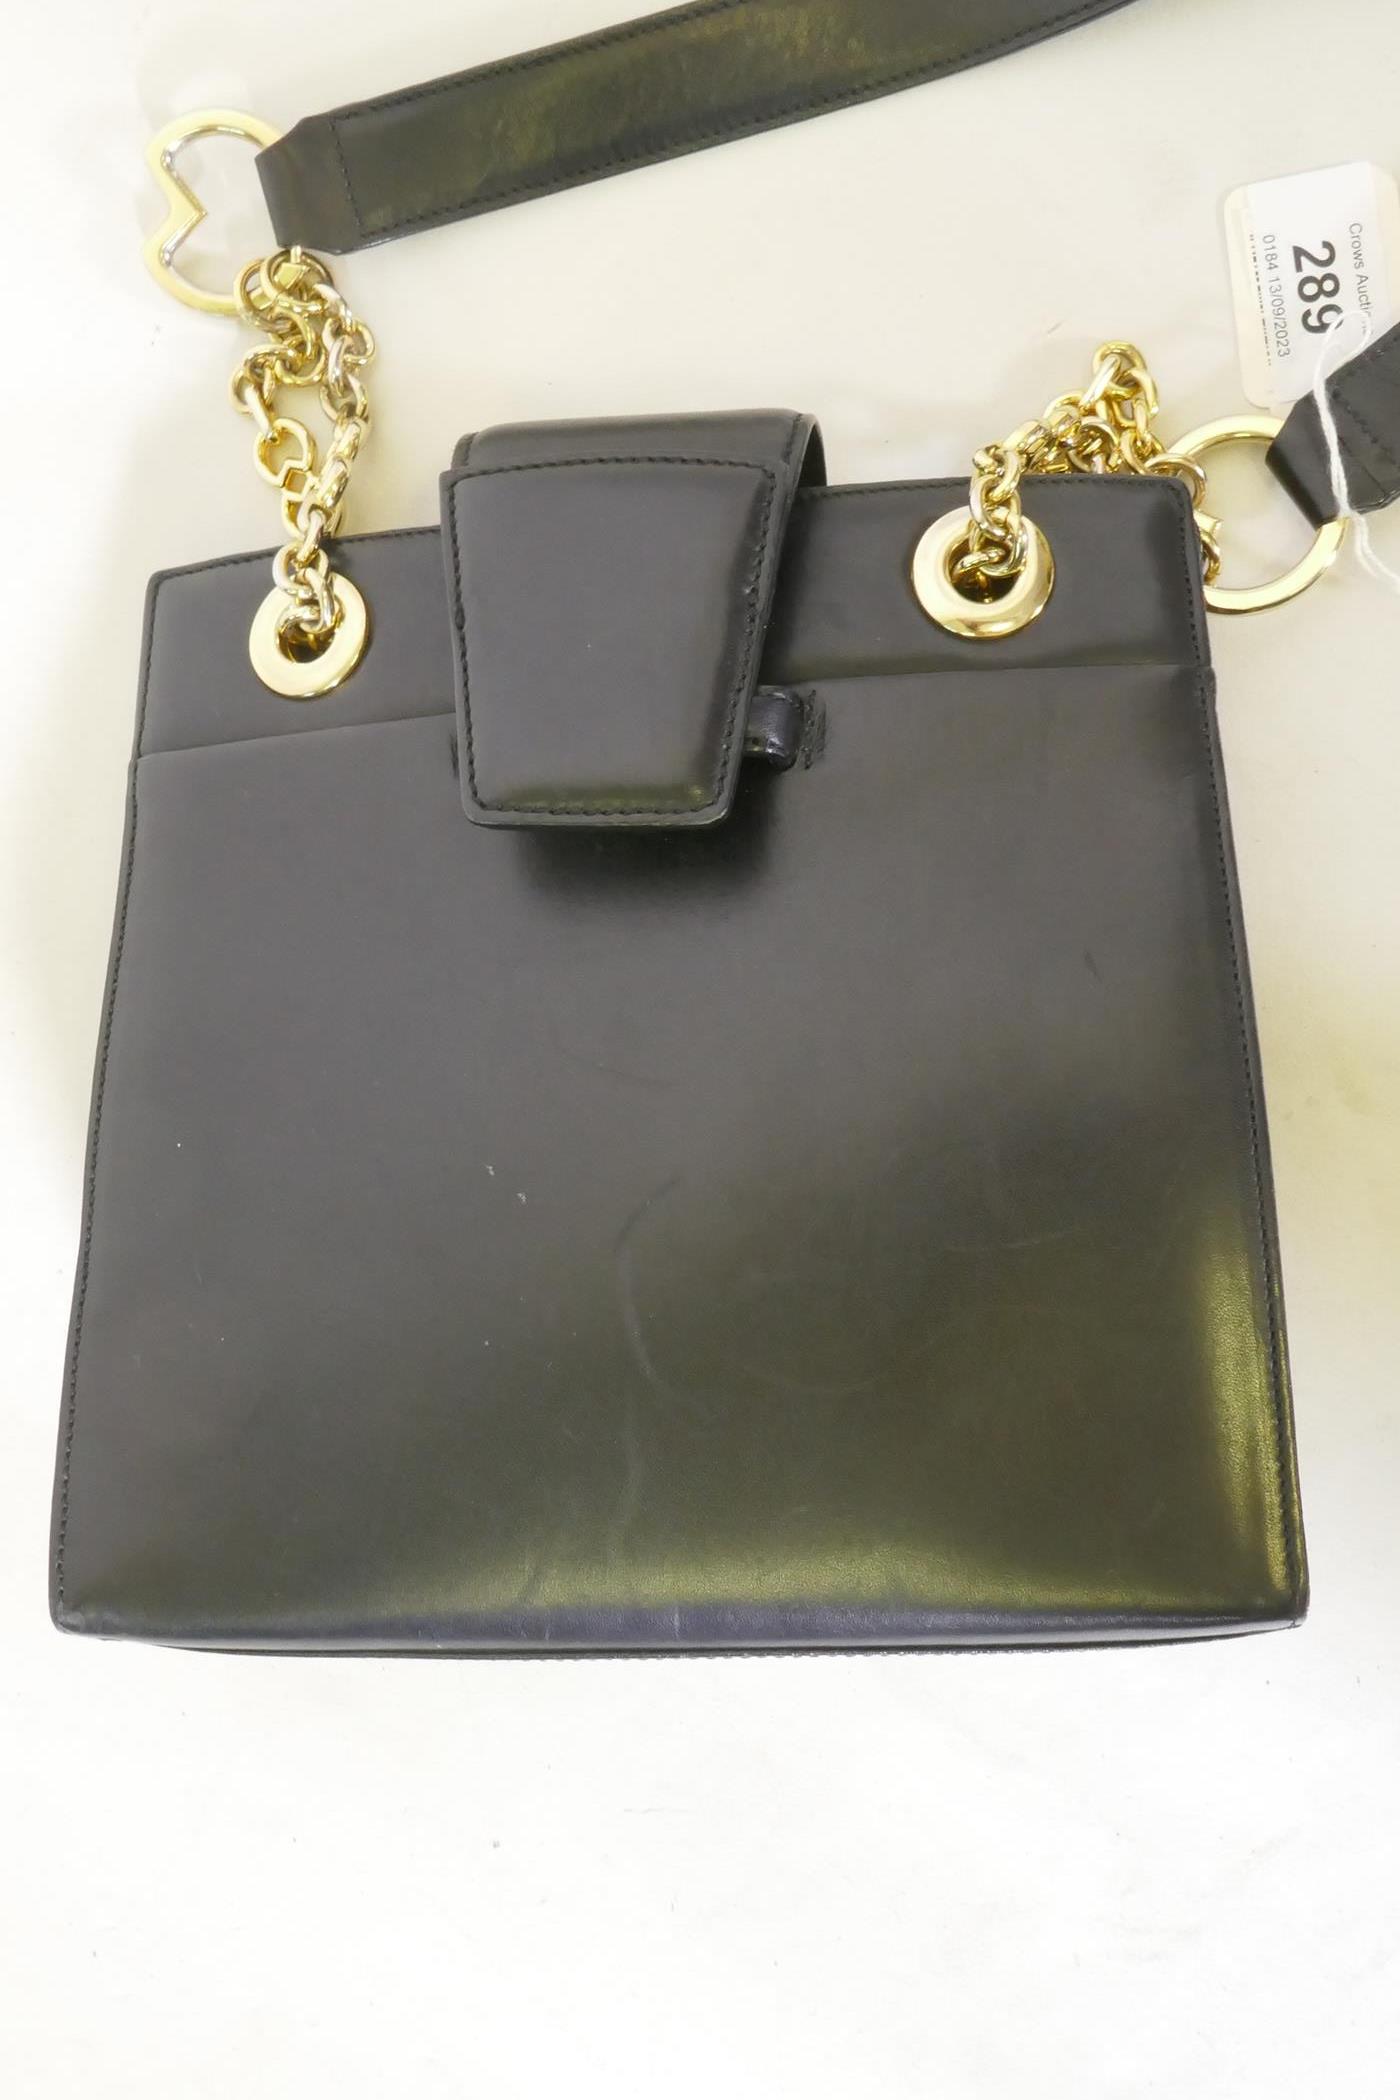 Mila Schon, Italian leather handbag with brass chain and leather strap, 20 x 20cm - Image 2 of 2